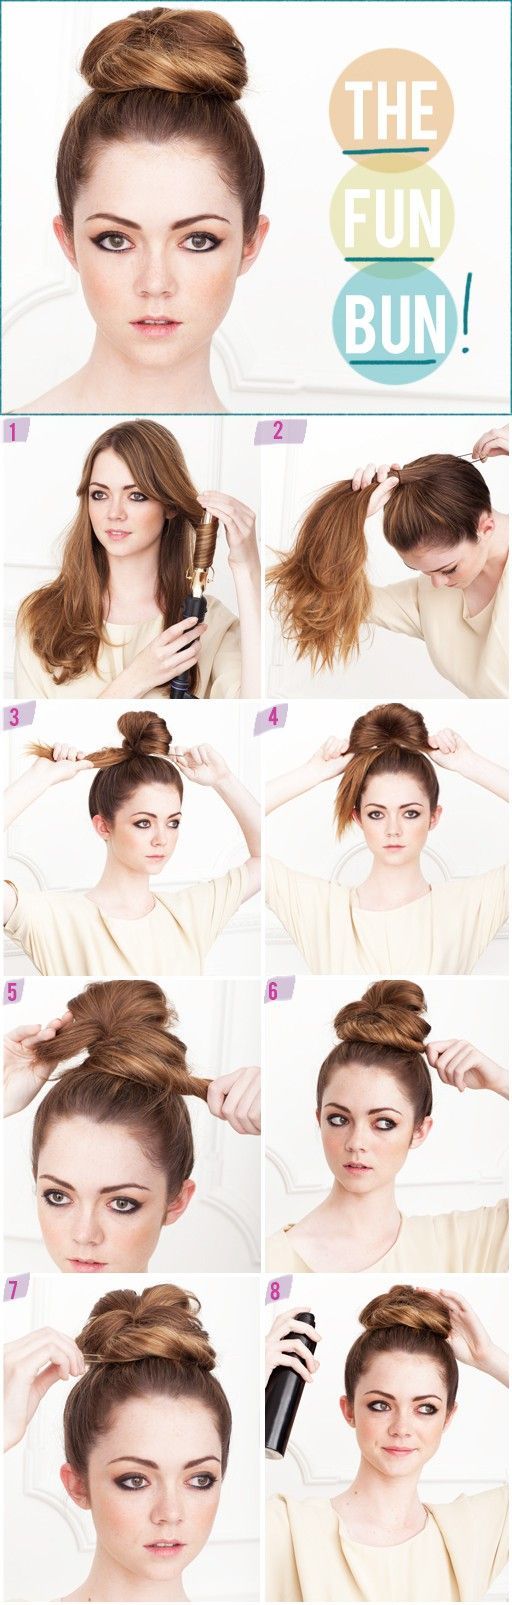 The fun bun. For people who want I take that messy "I don't care what p